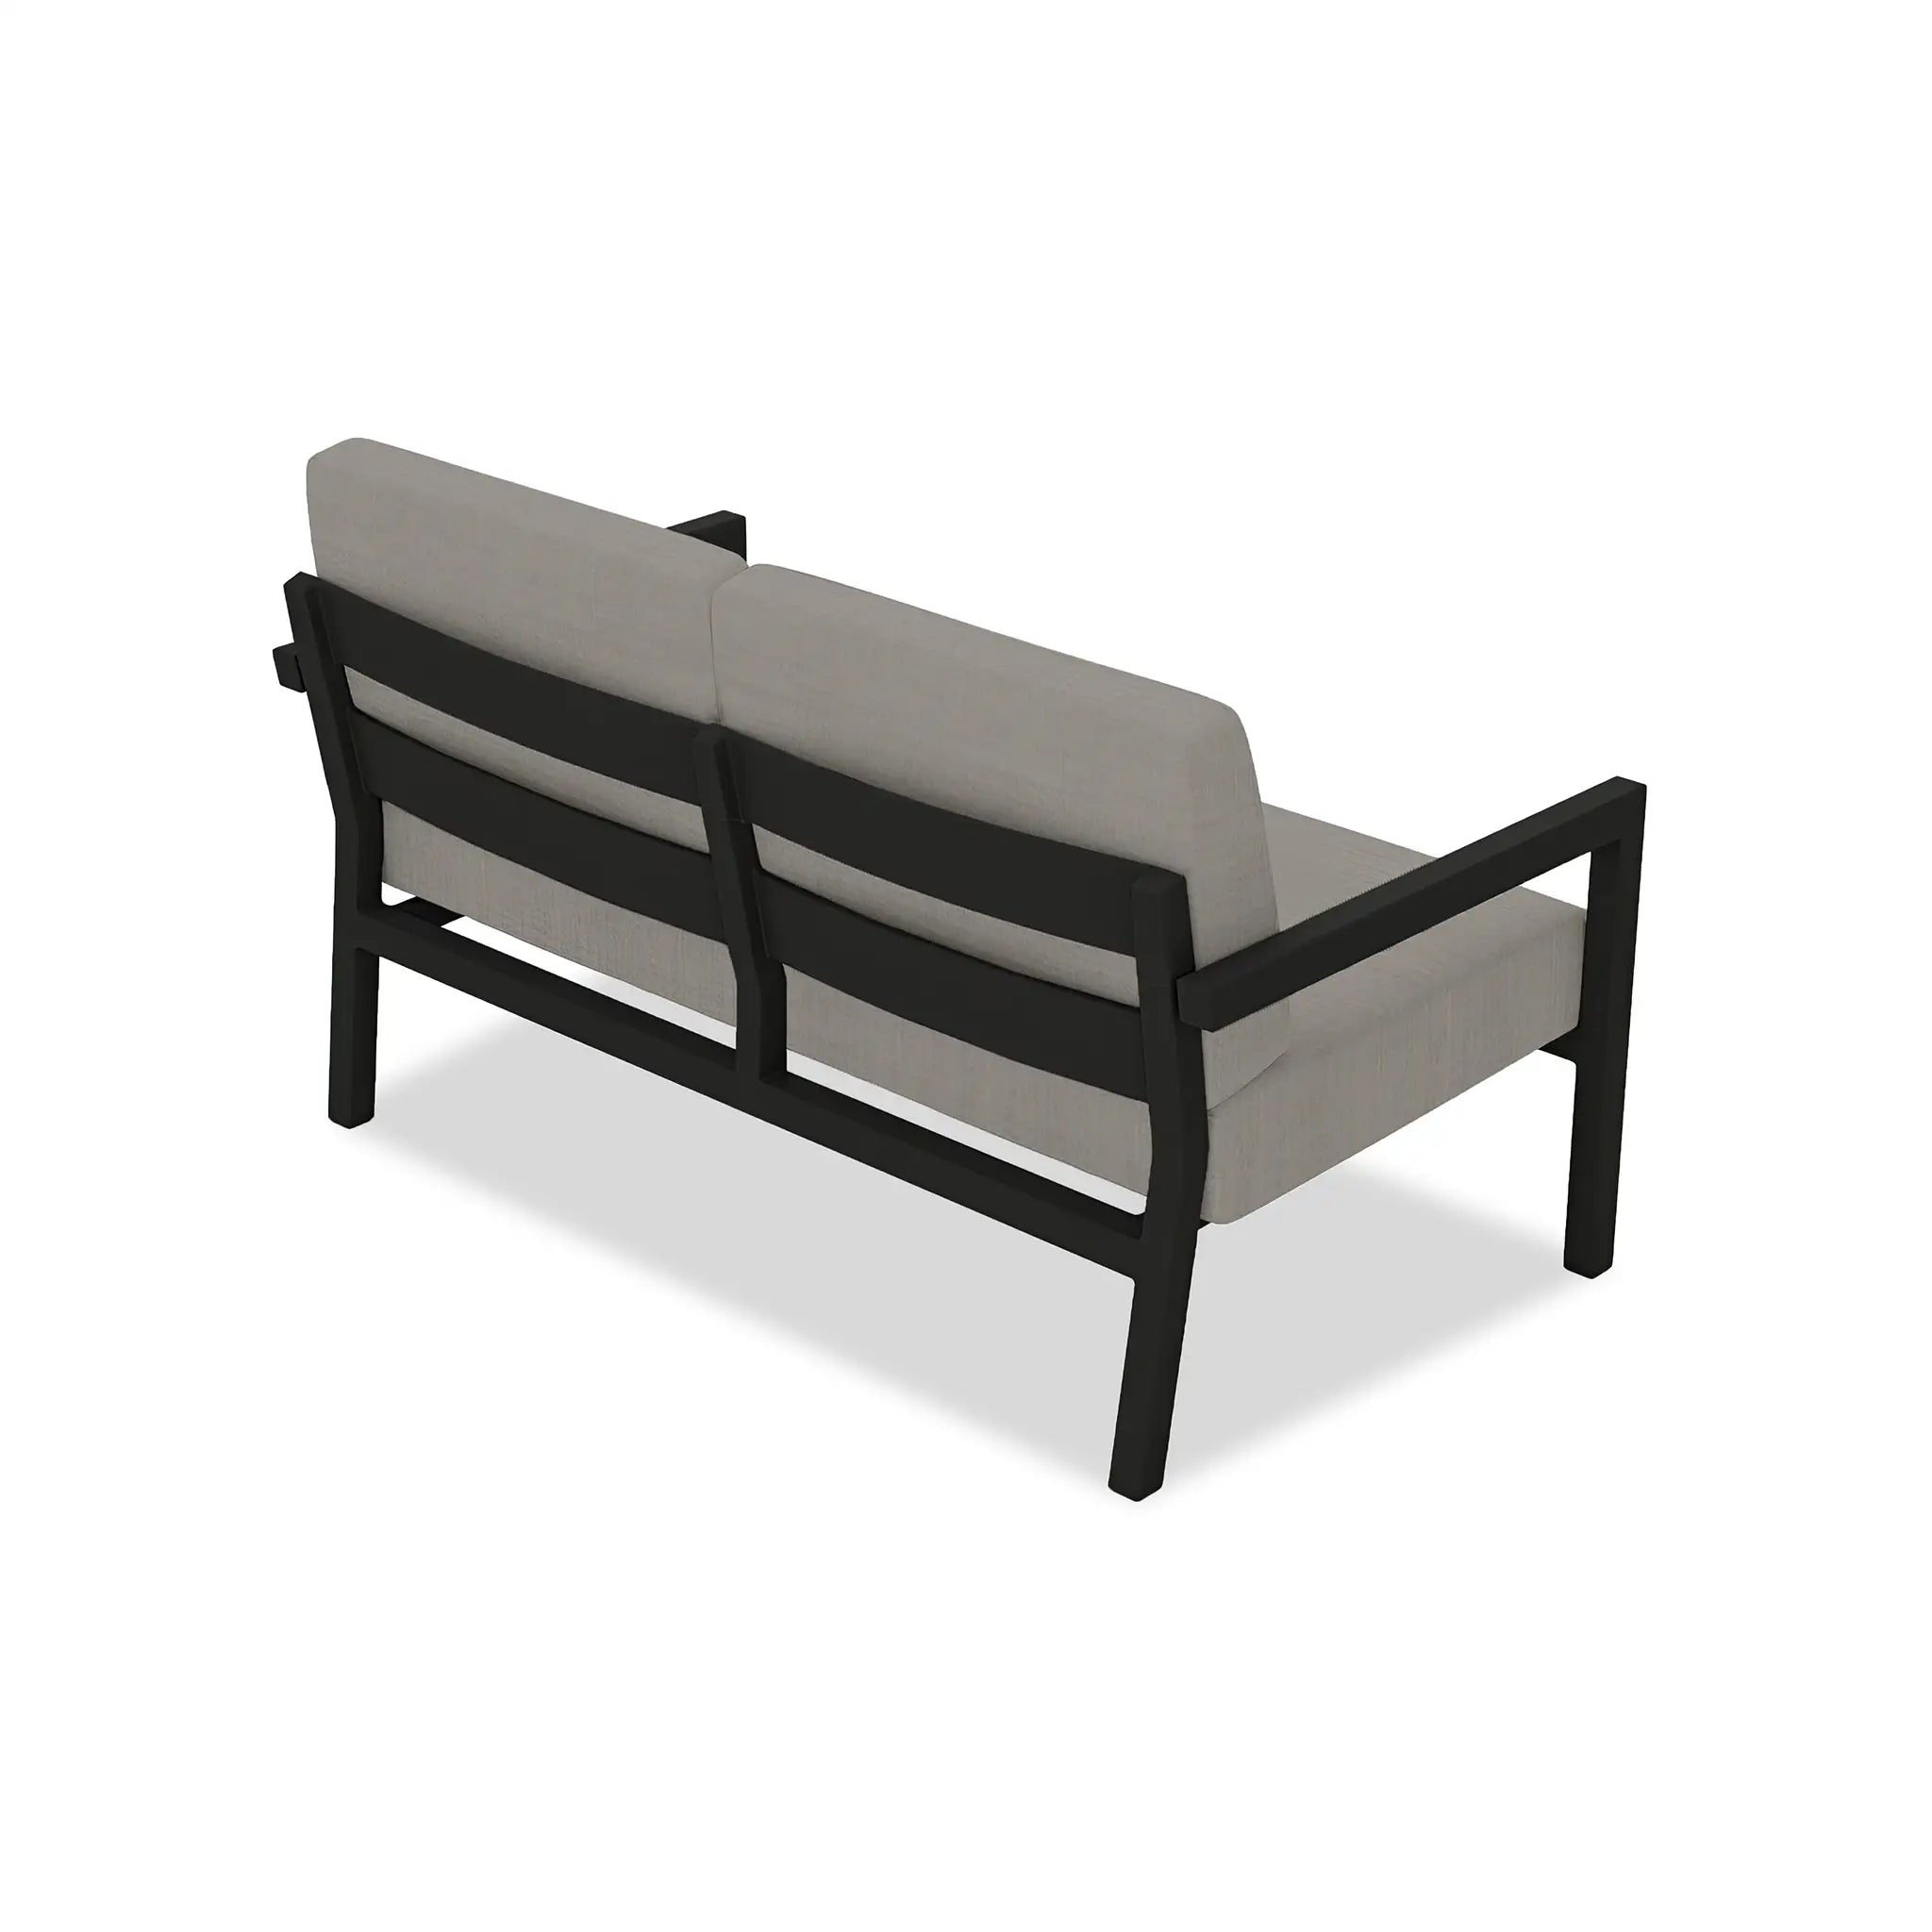 Pacifica Loveseat - Black by Harmonia Living